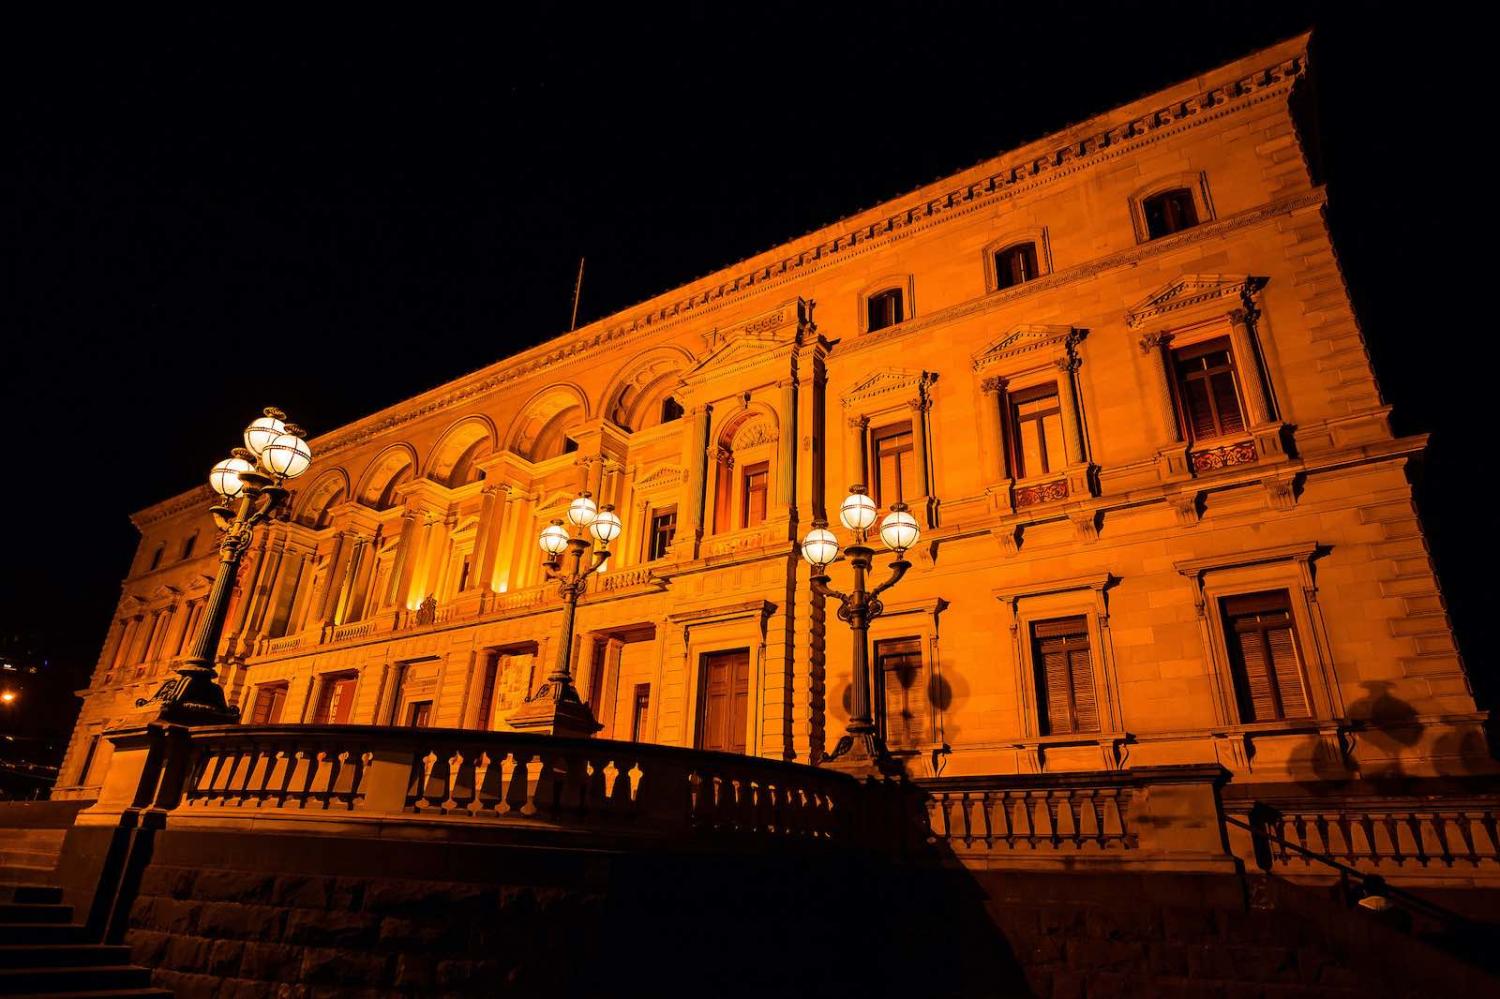 Treasury Building in Melbourne lit orange in commemoration of the 16 Days of Activism and the International Day to End Violence against Women in 2016 (UN Women/Flickr)